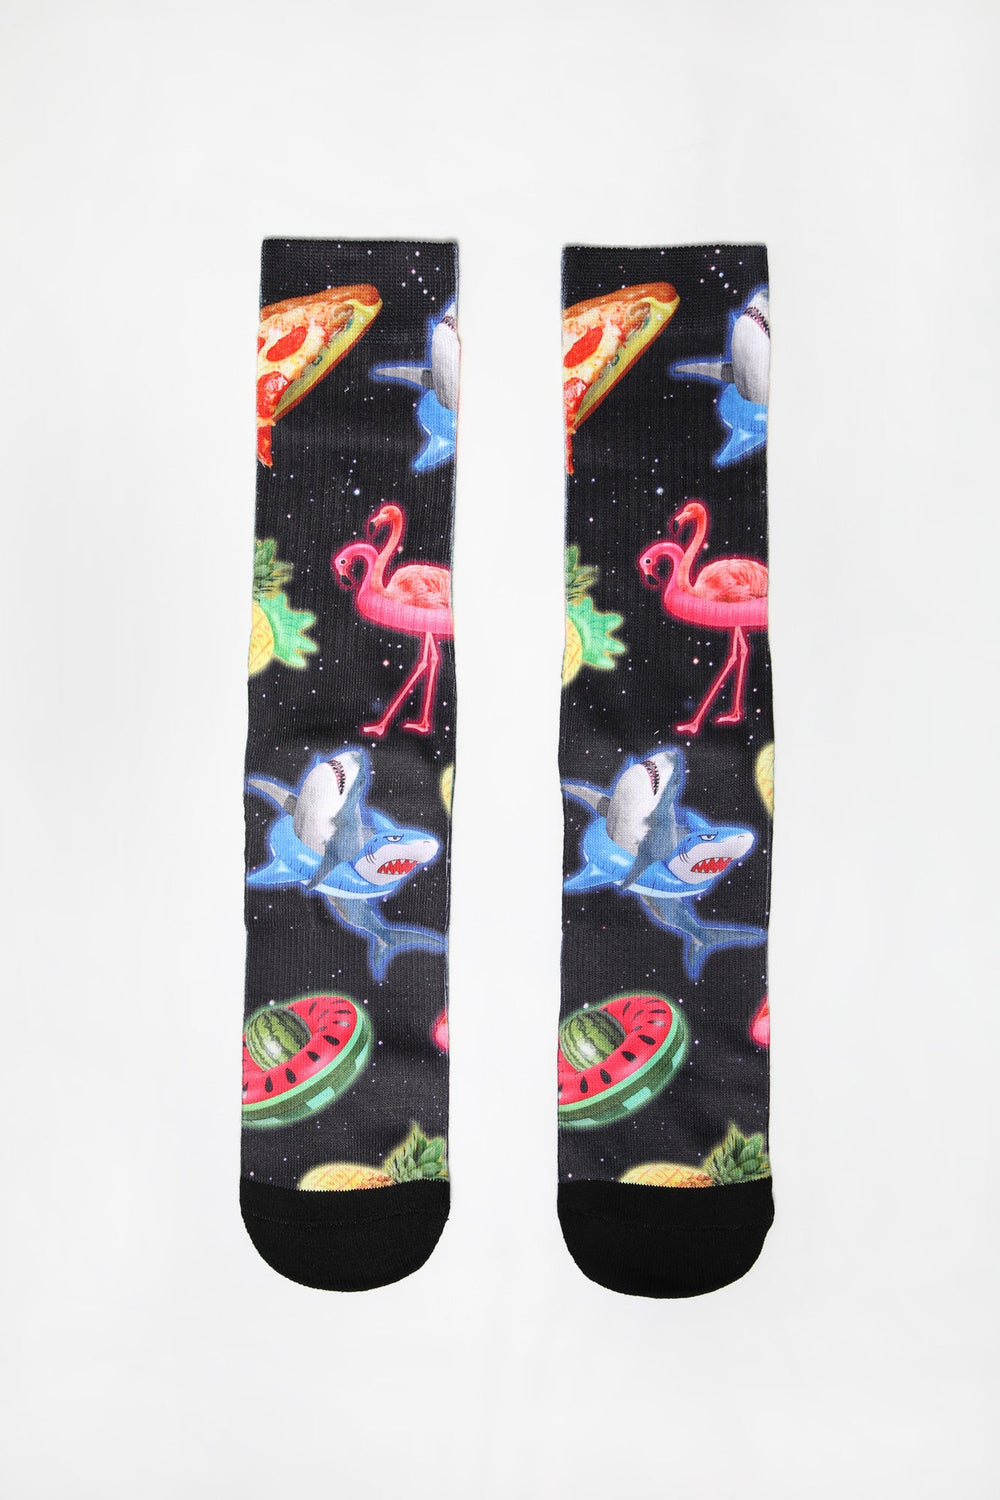 Chaussettes Animaux Flottants Zoo York Homme Chaussettes Animaux Flottants Zoo York Homme